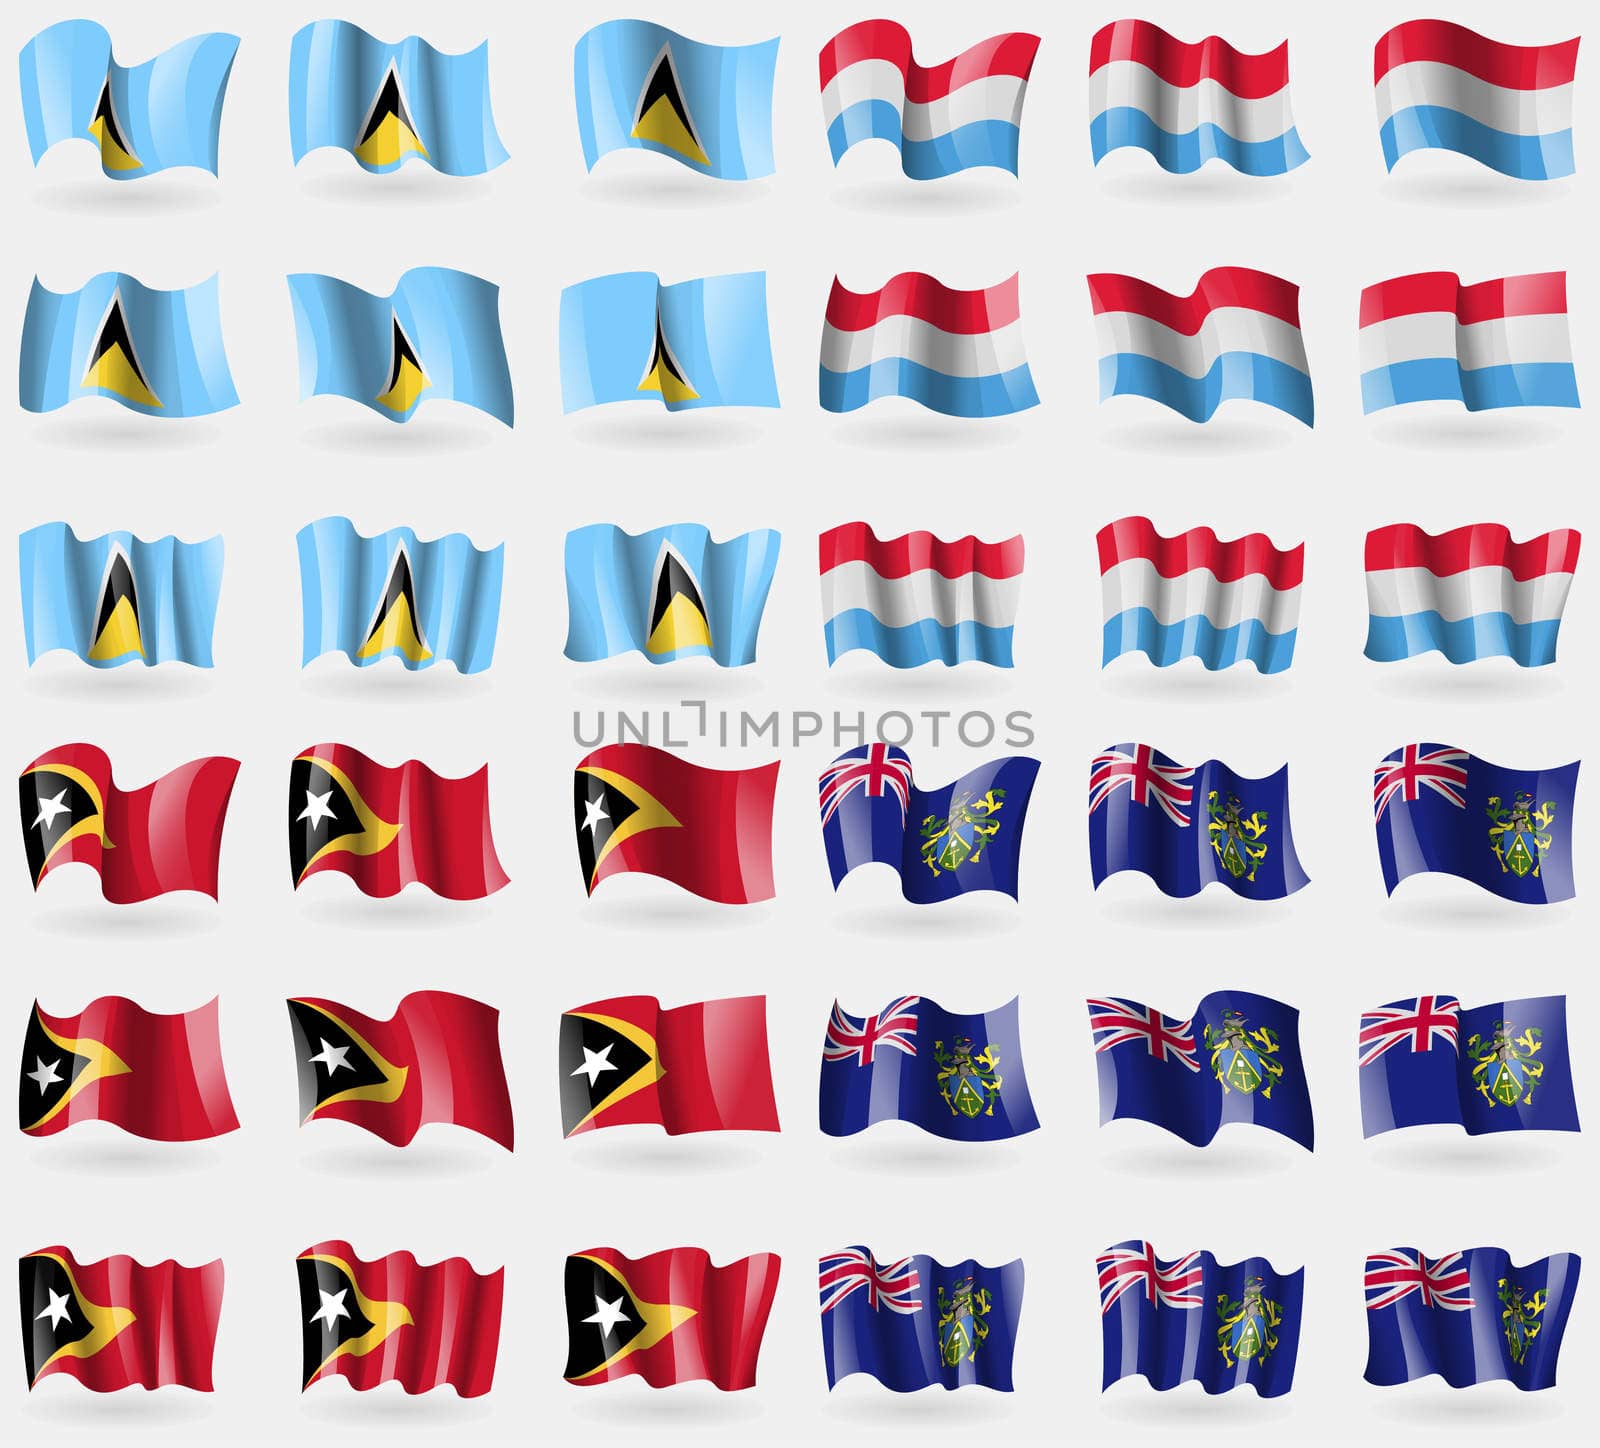 Saint Lucia, Luxembourg, East Timor, Pitcairn Islands. Set of 36 flags of the countries of the world. illustration